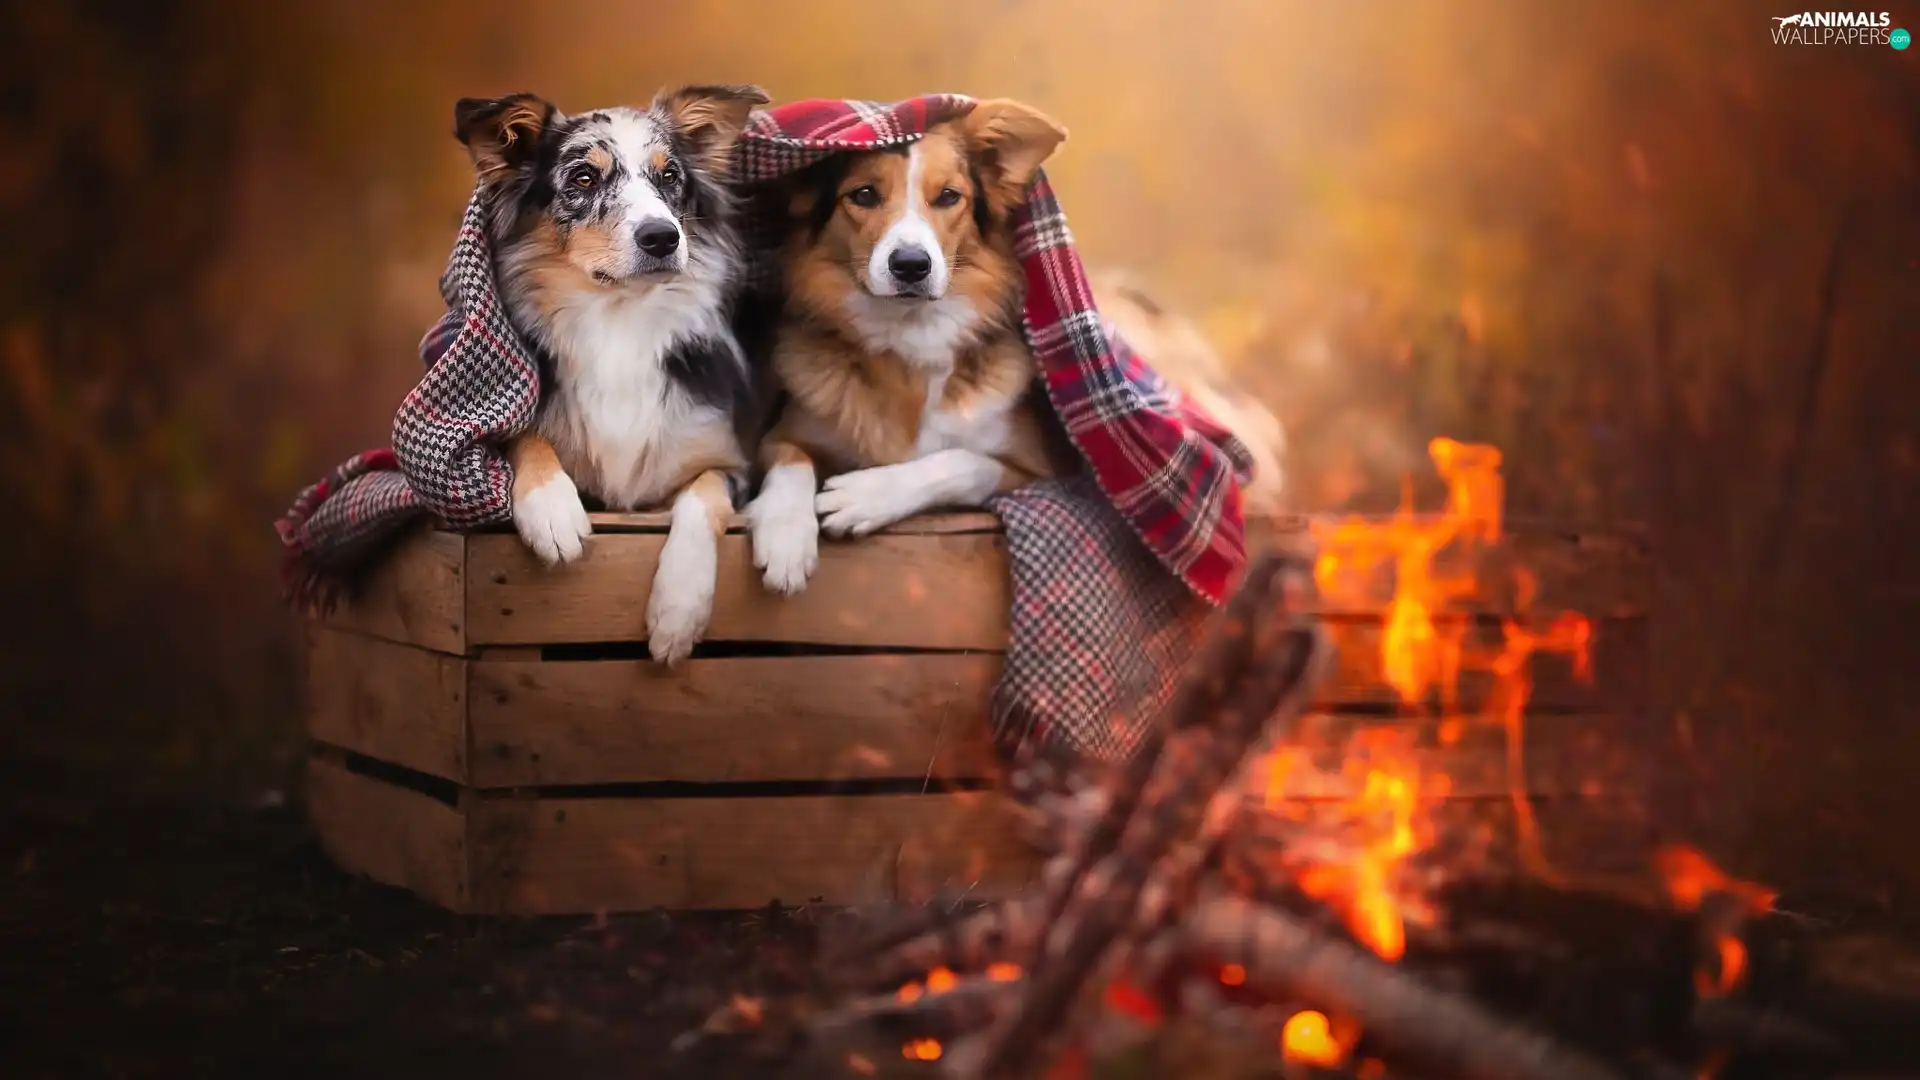 coverlet, fire, Border Collie, box, Dogs